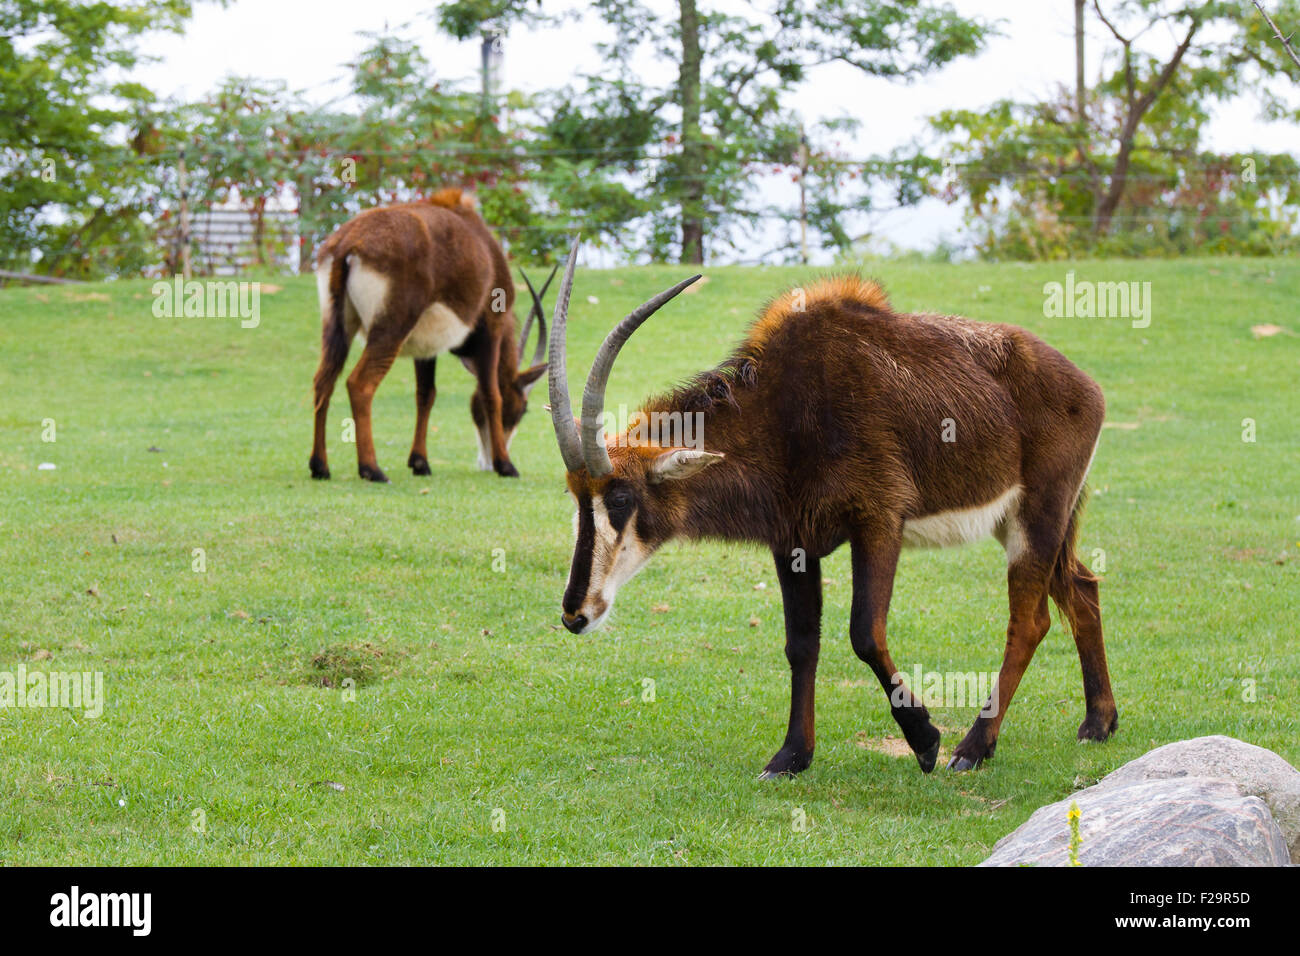 The sable antelope is one of the larger species of antelope. Both sexes have long horns that arch backwards. Stock Photo